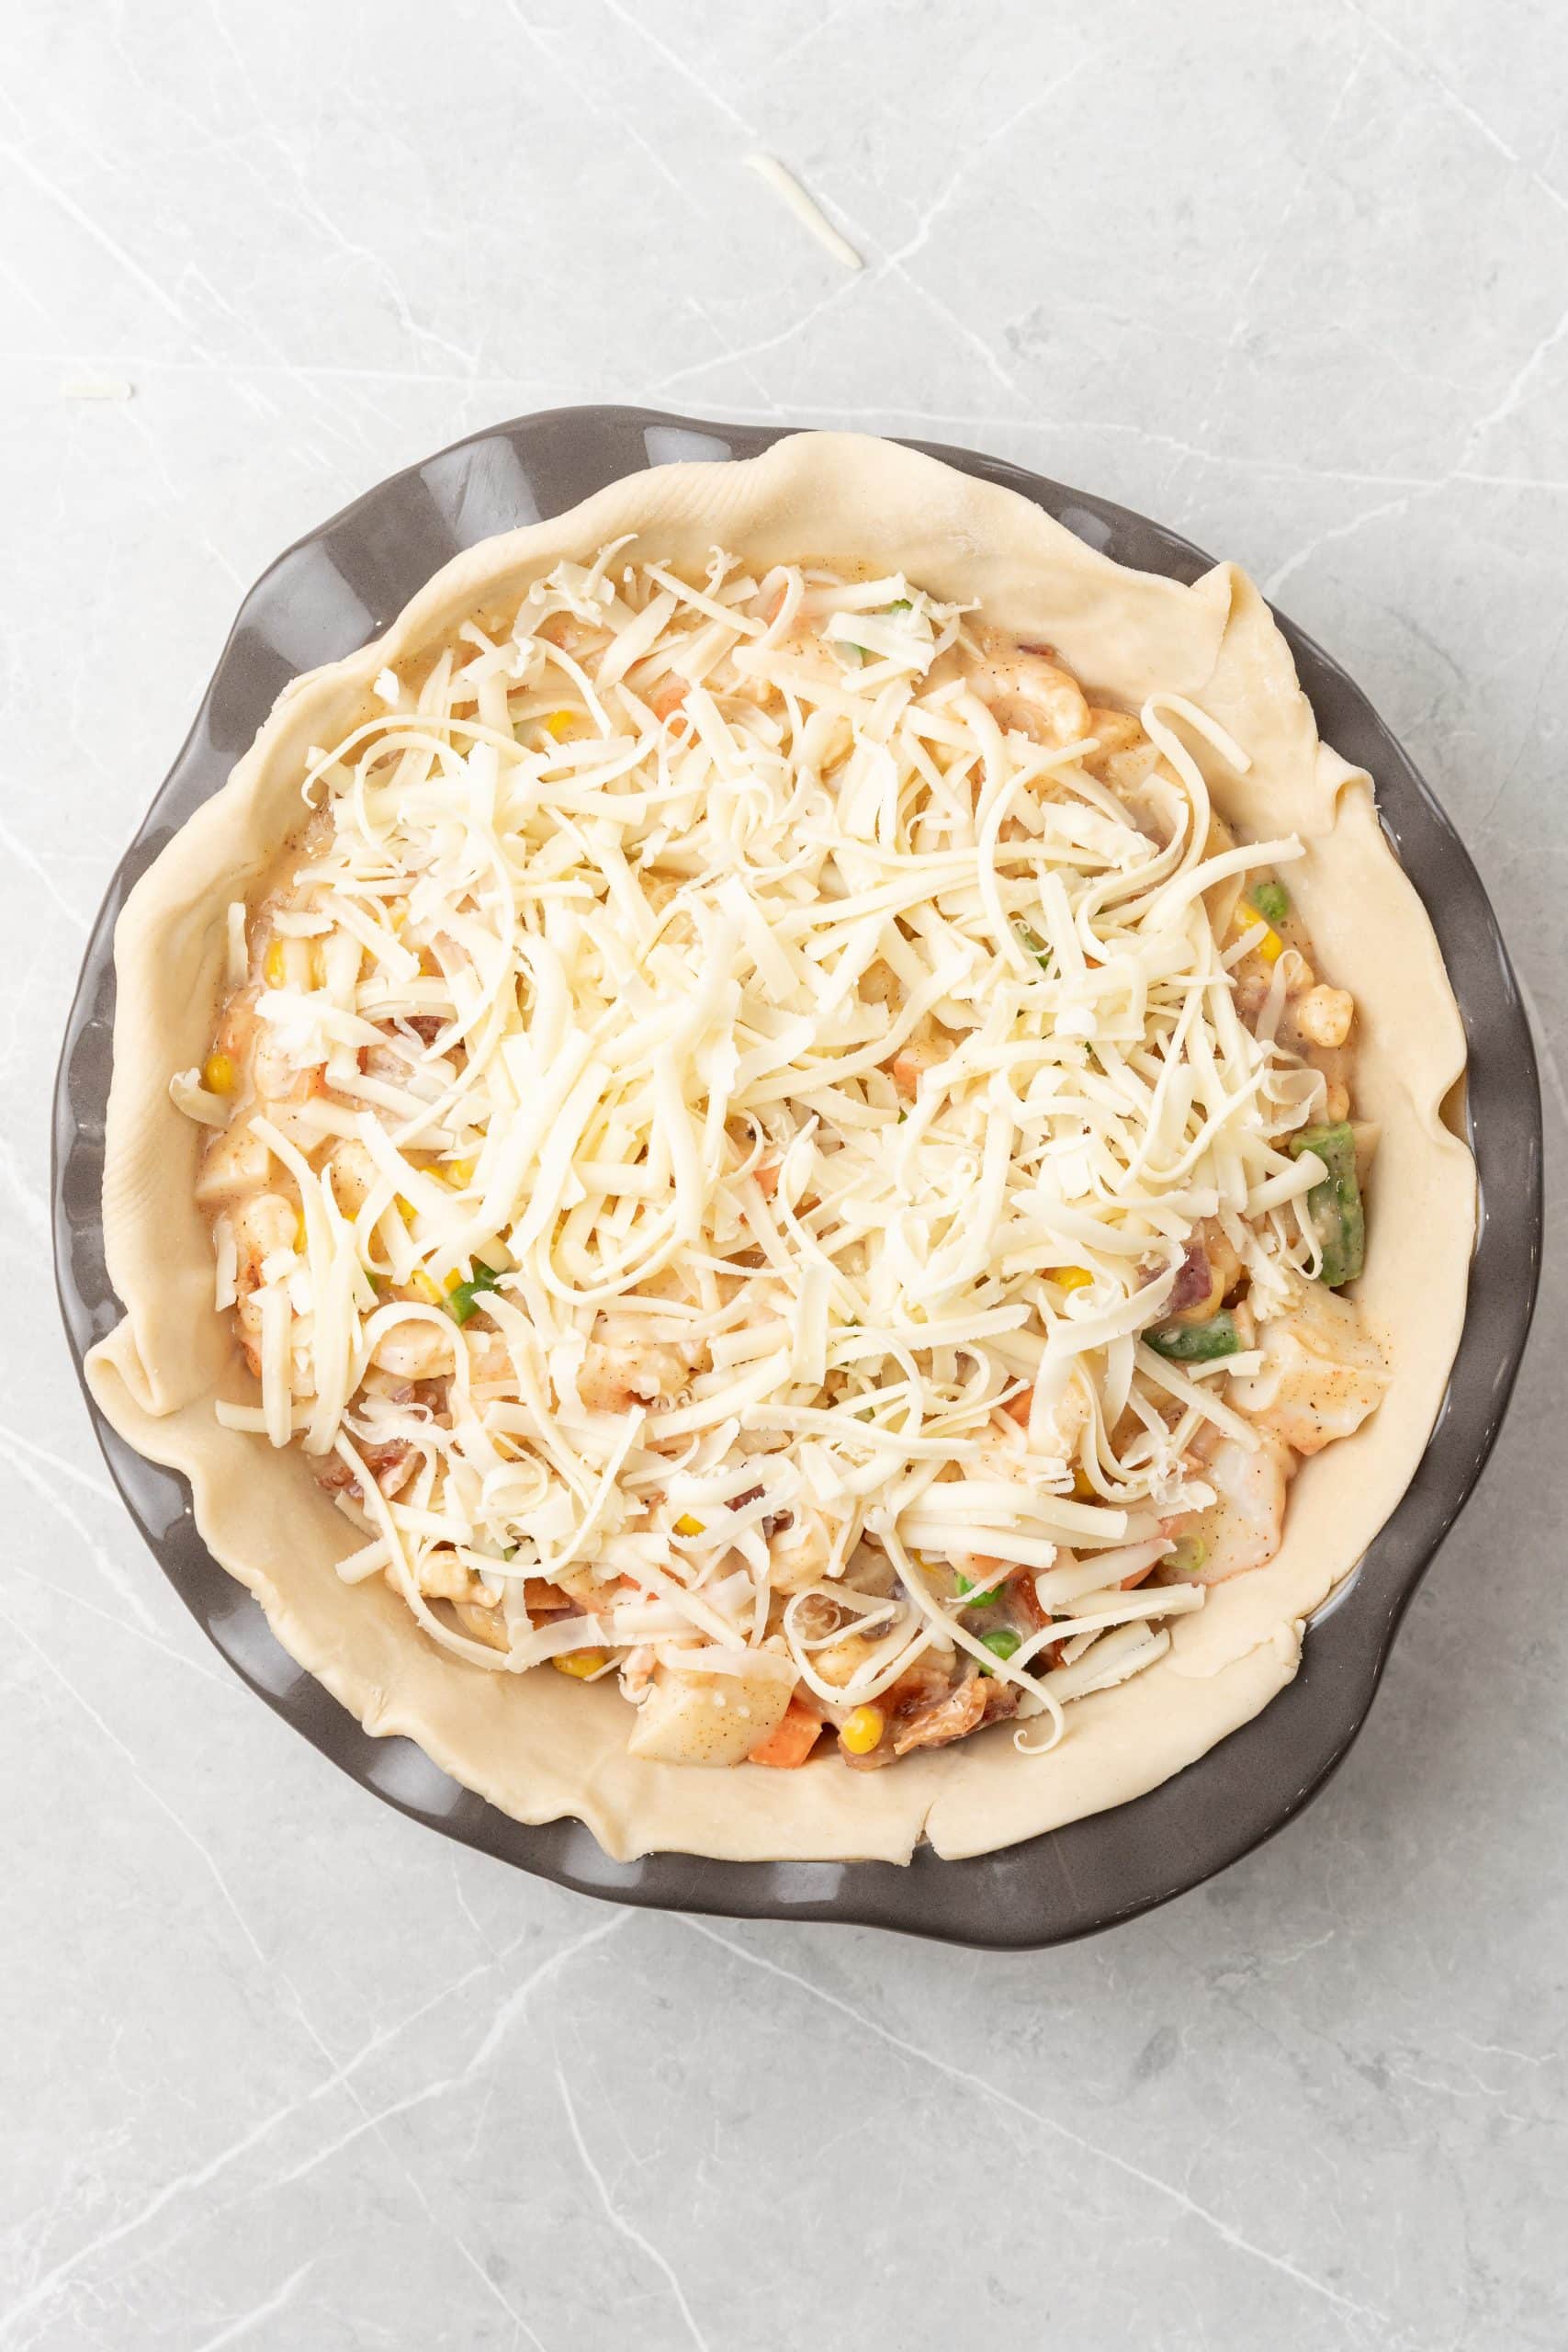 shredded cheese topped seafood pot pie filling in an unbaked pie crust in a metal pie pan